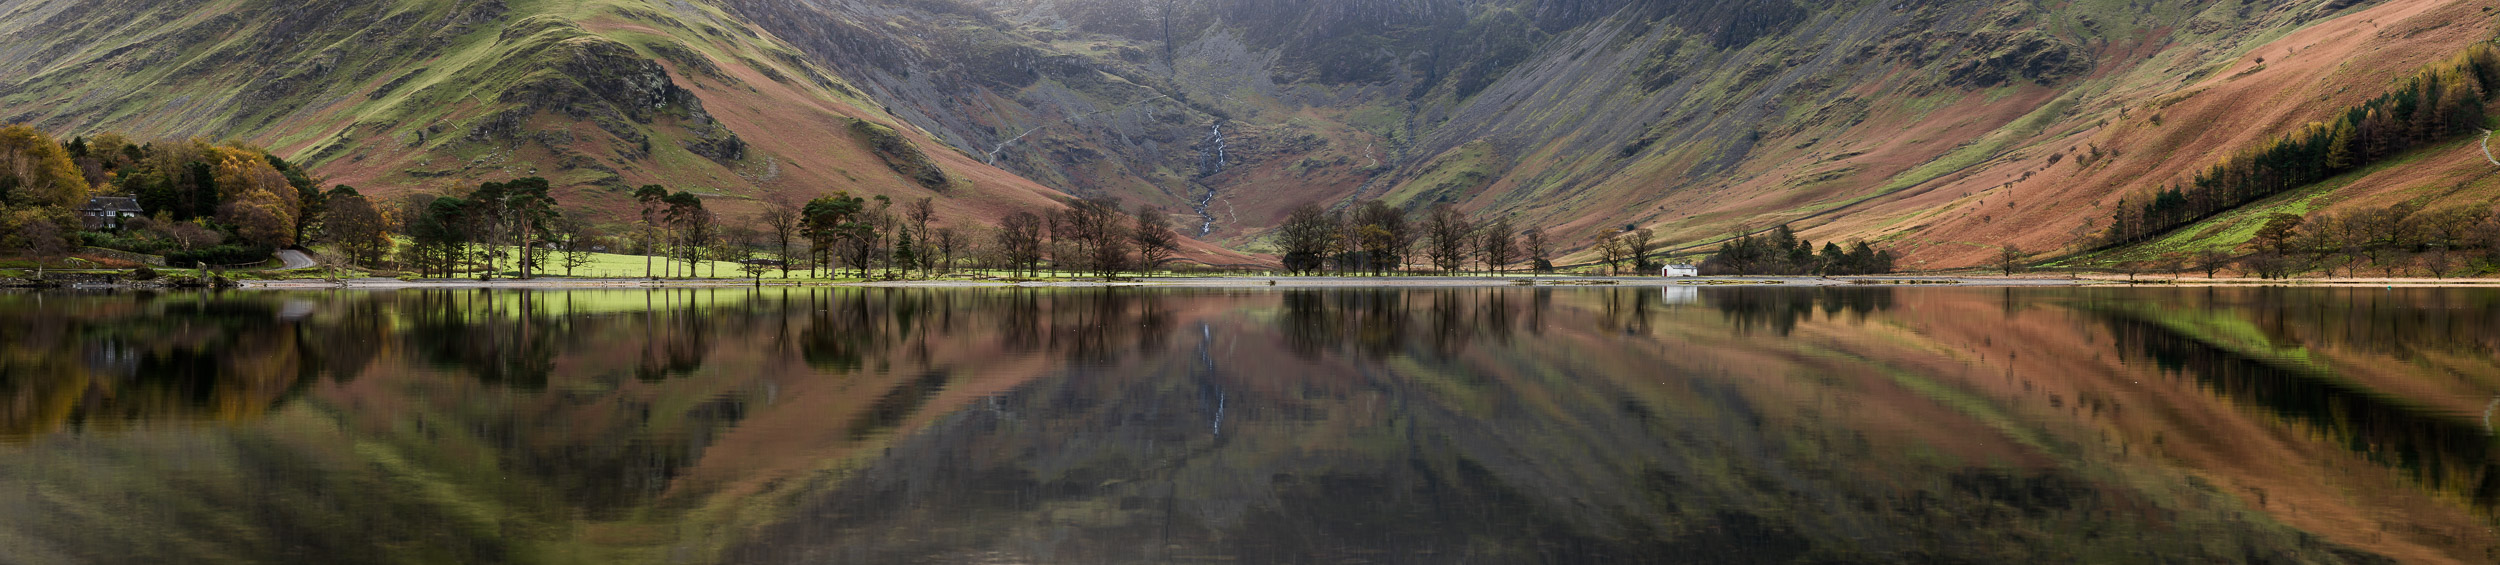 Buttermere Sentinels Reflection